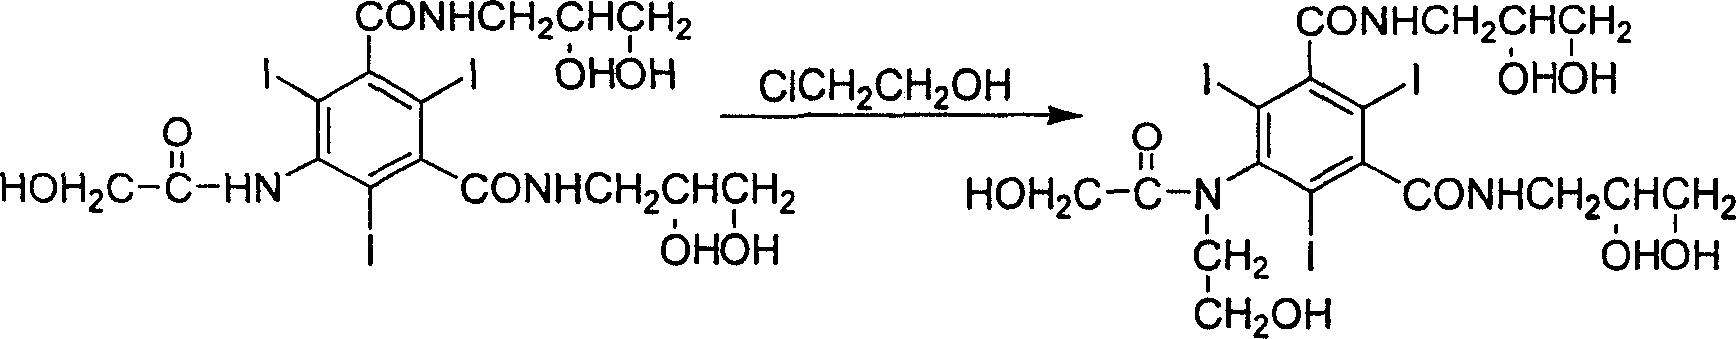 Improved process for synthesizing ioversol